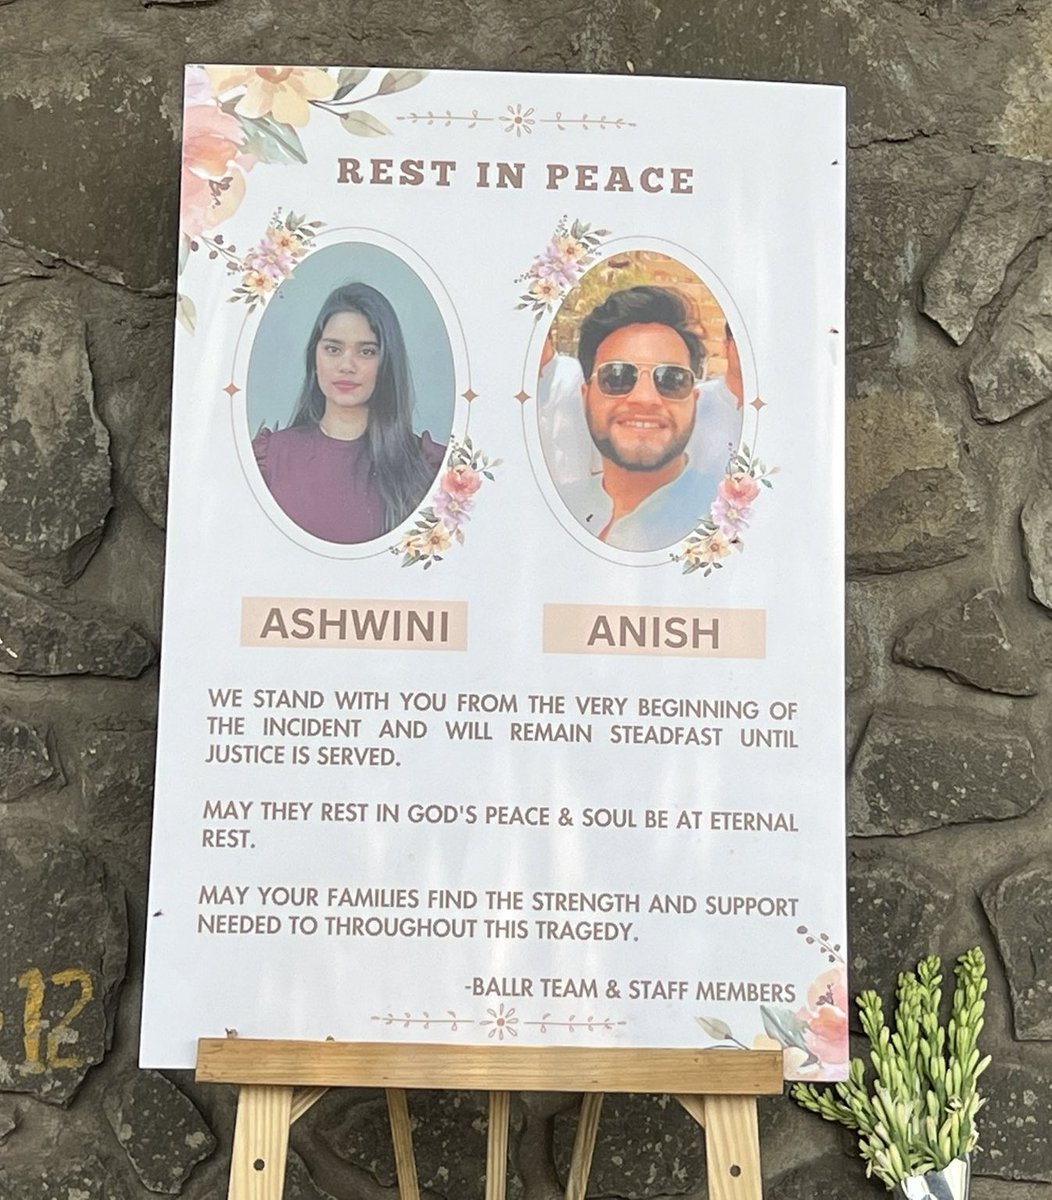 This is Aswini and Anish, two IT professionals who were returning home in Pune on May 19 when an unregistered Porsche, driving at 150 km/h in Kalyani Nagar, hit them. One of them died on the spot, and the other died during medical treatment. The driver of the car was a